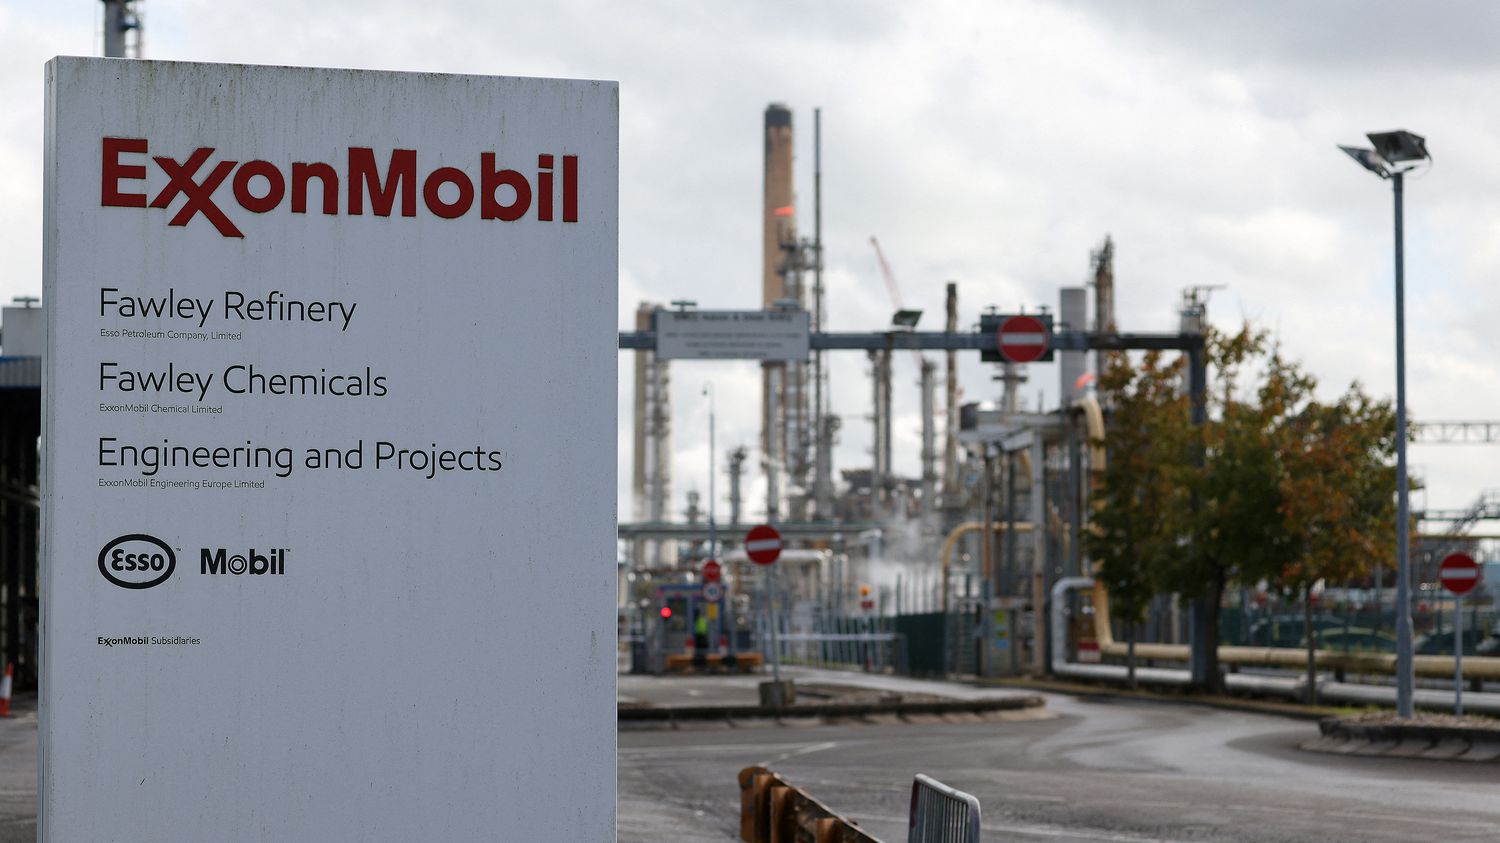 ExxonMobil had accurate predictions of global warming 40 years ago, new study finds
